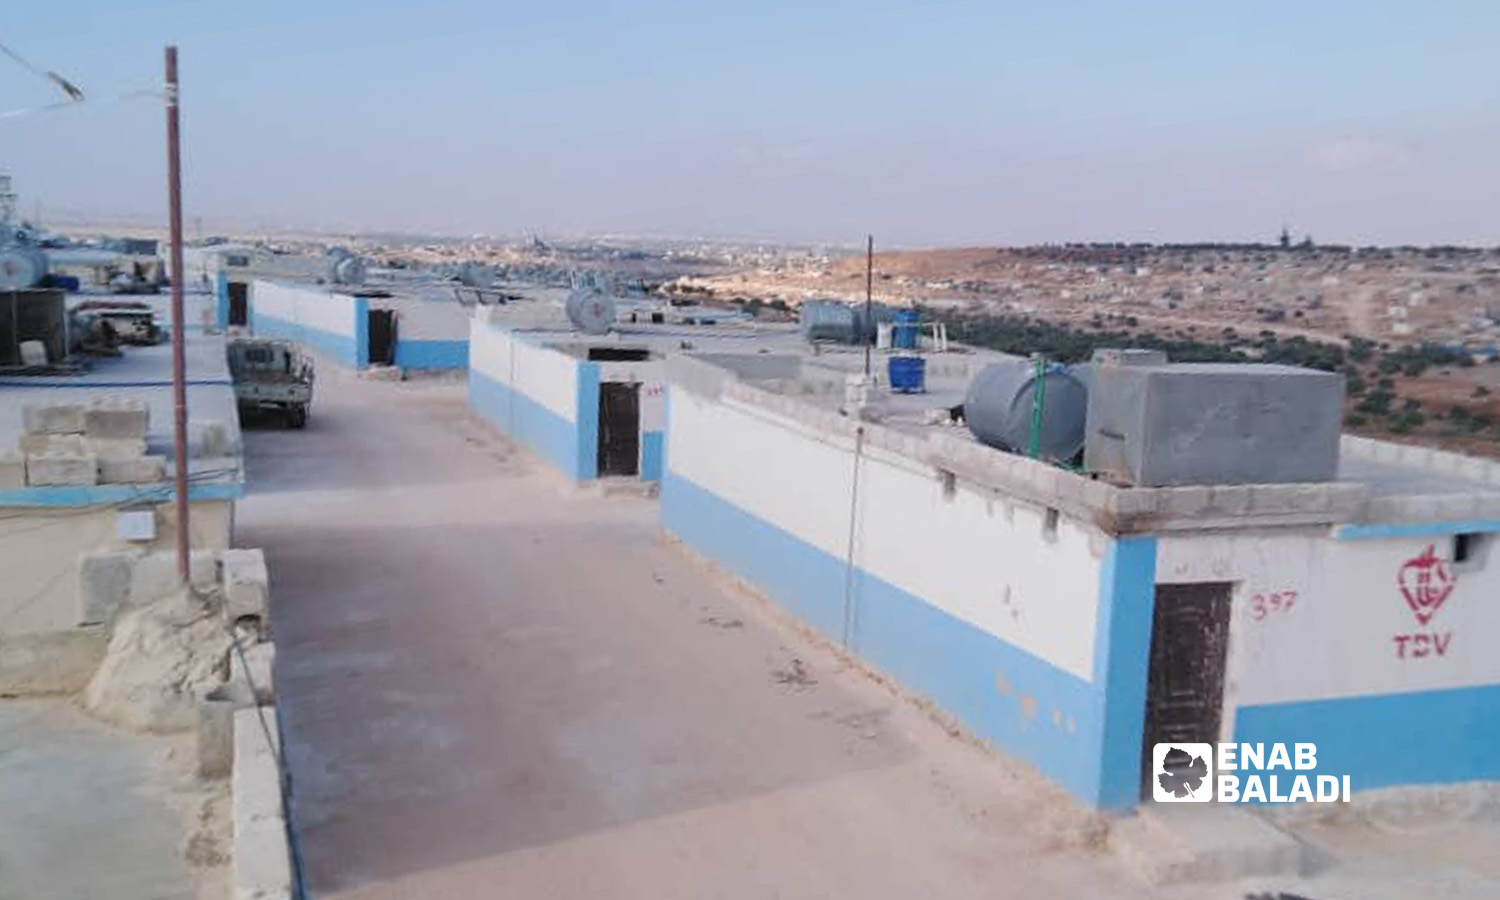 Houses of the Kemmune residential compound in Idlib countryside - 21 June 2022 (Enab Baladi)